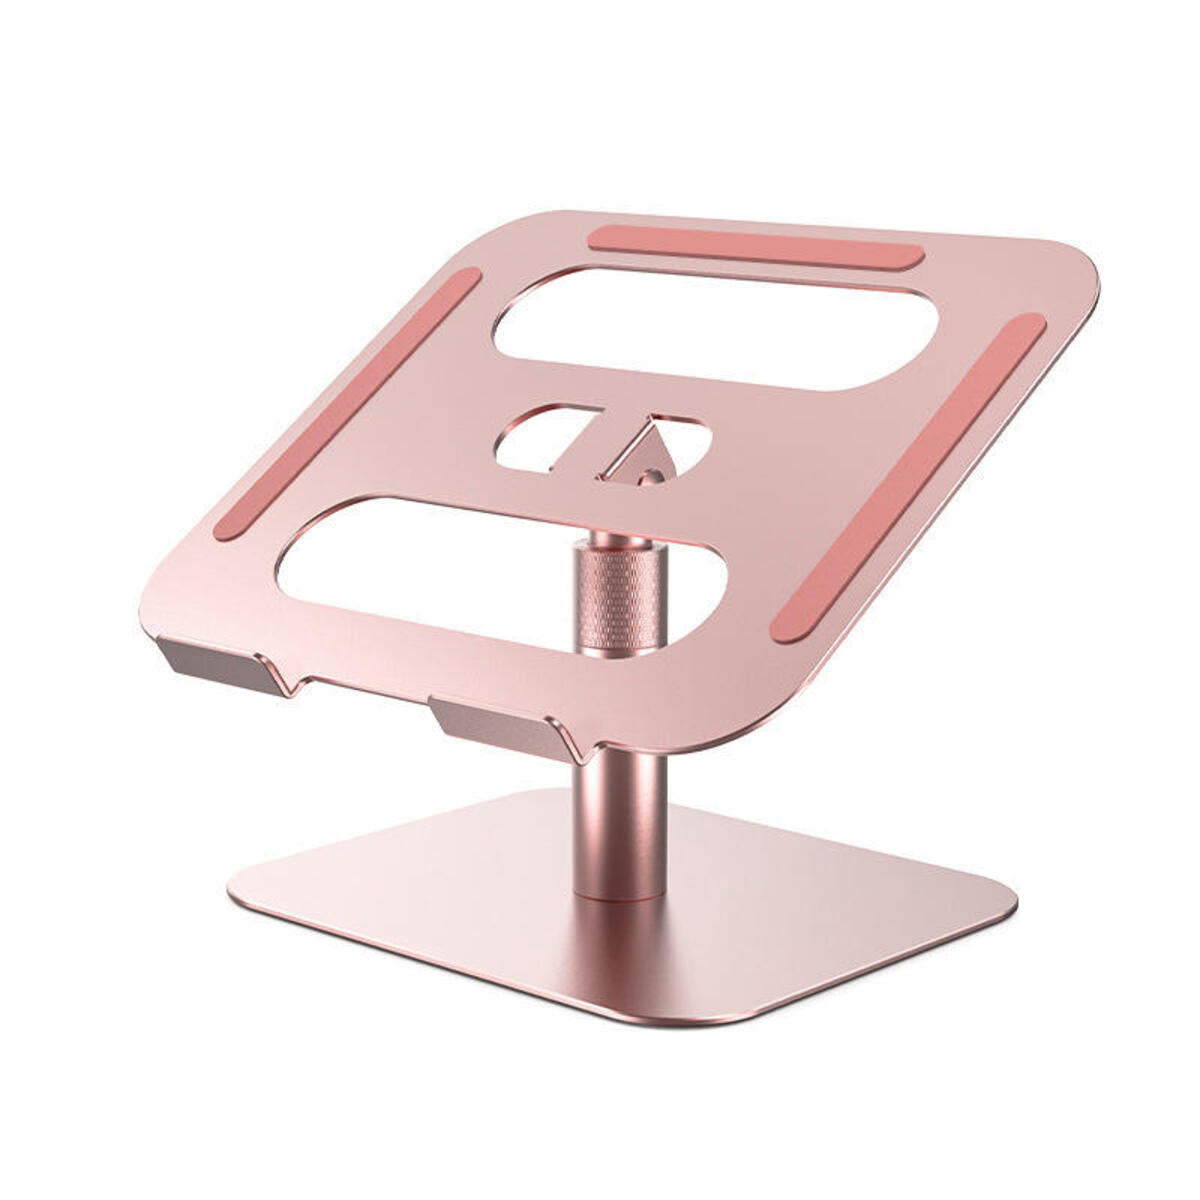 Adjustable Aluminum Alloy Portable Stand for Macbook iPad Pro